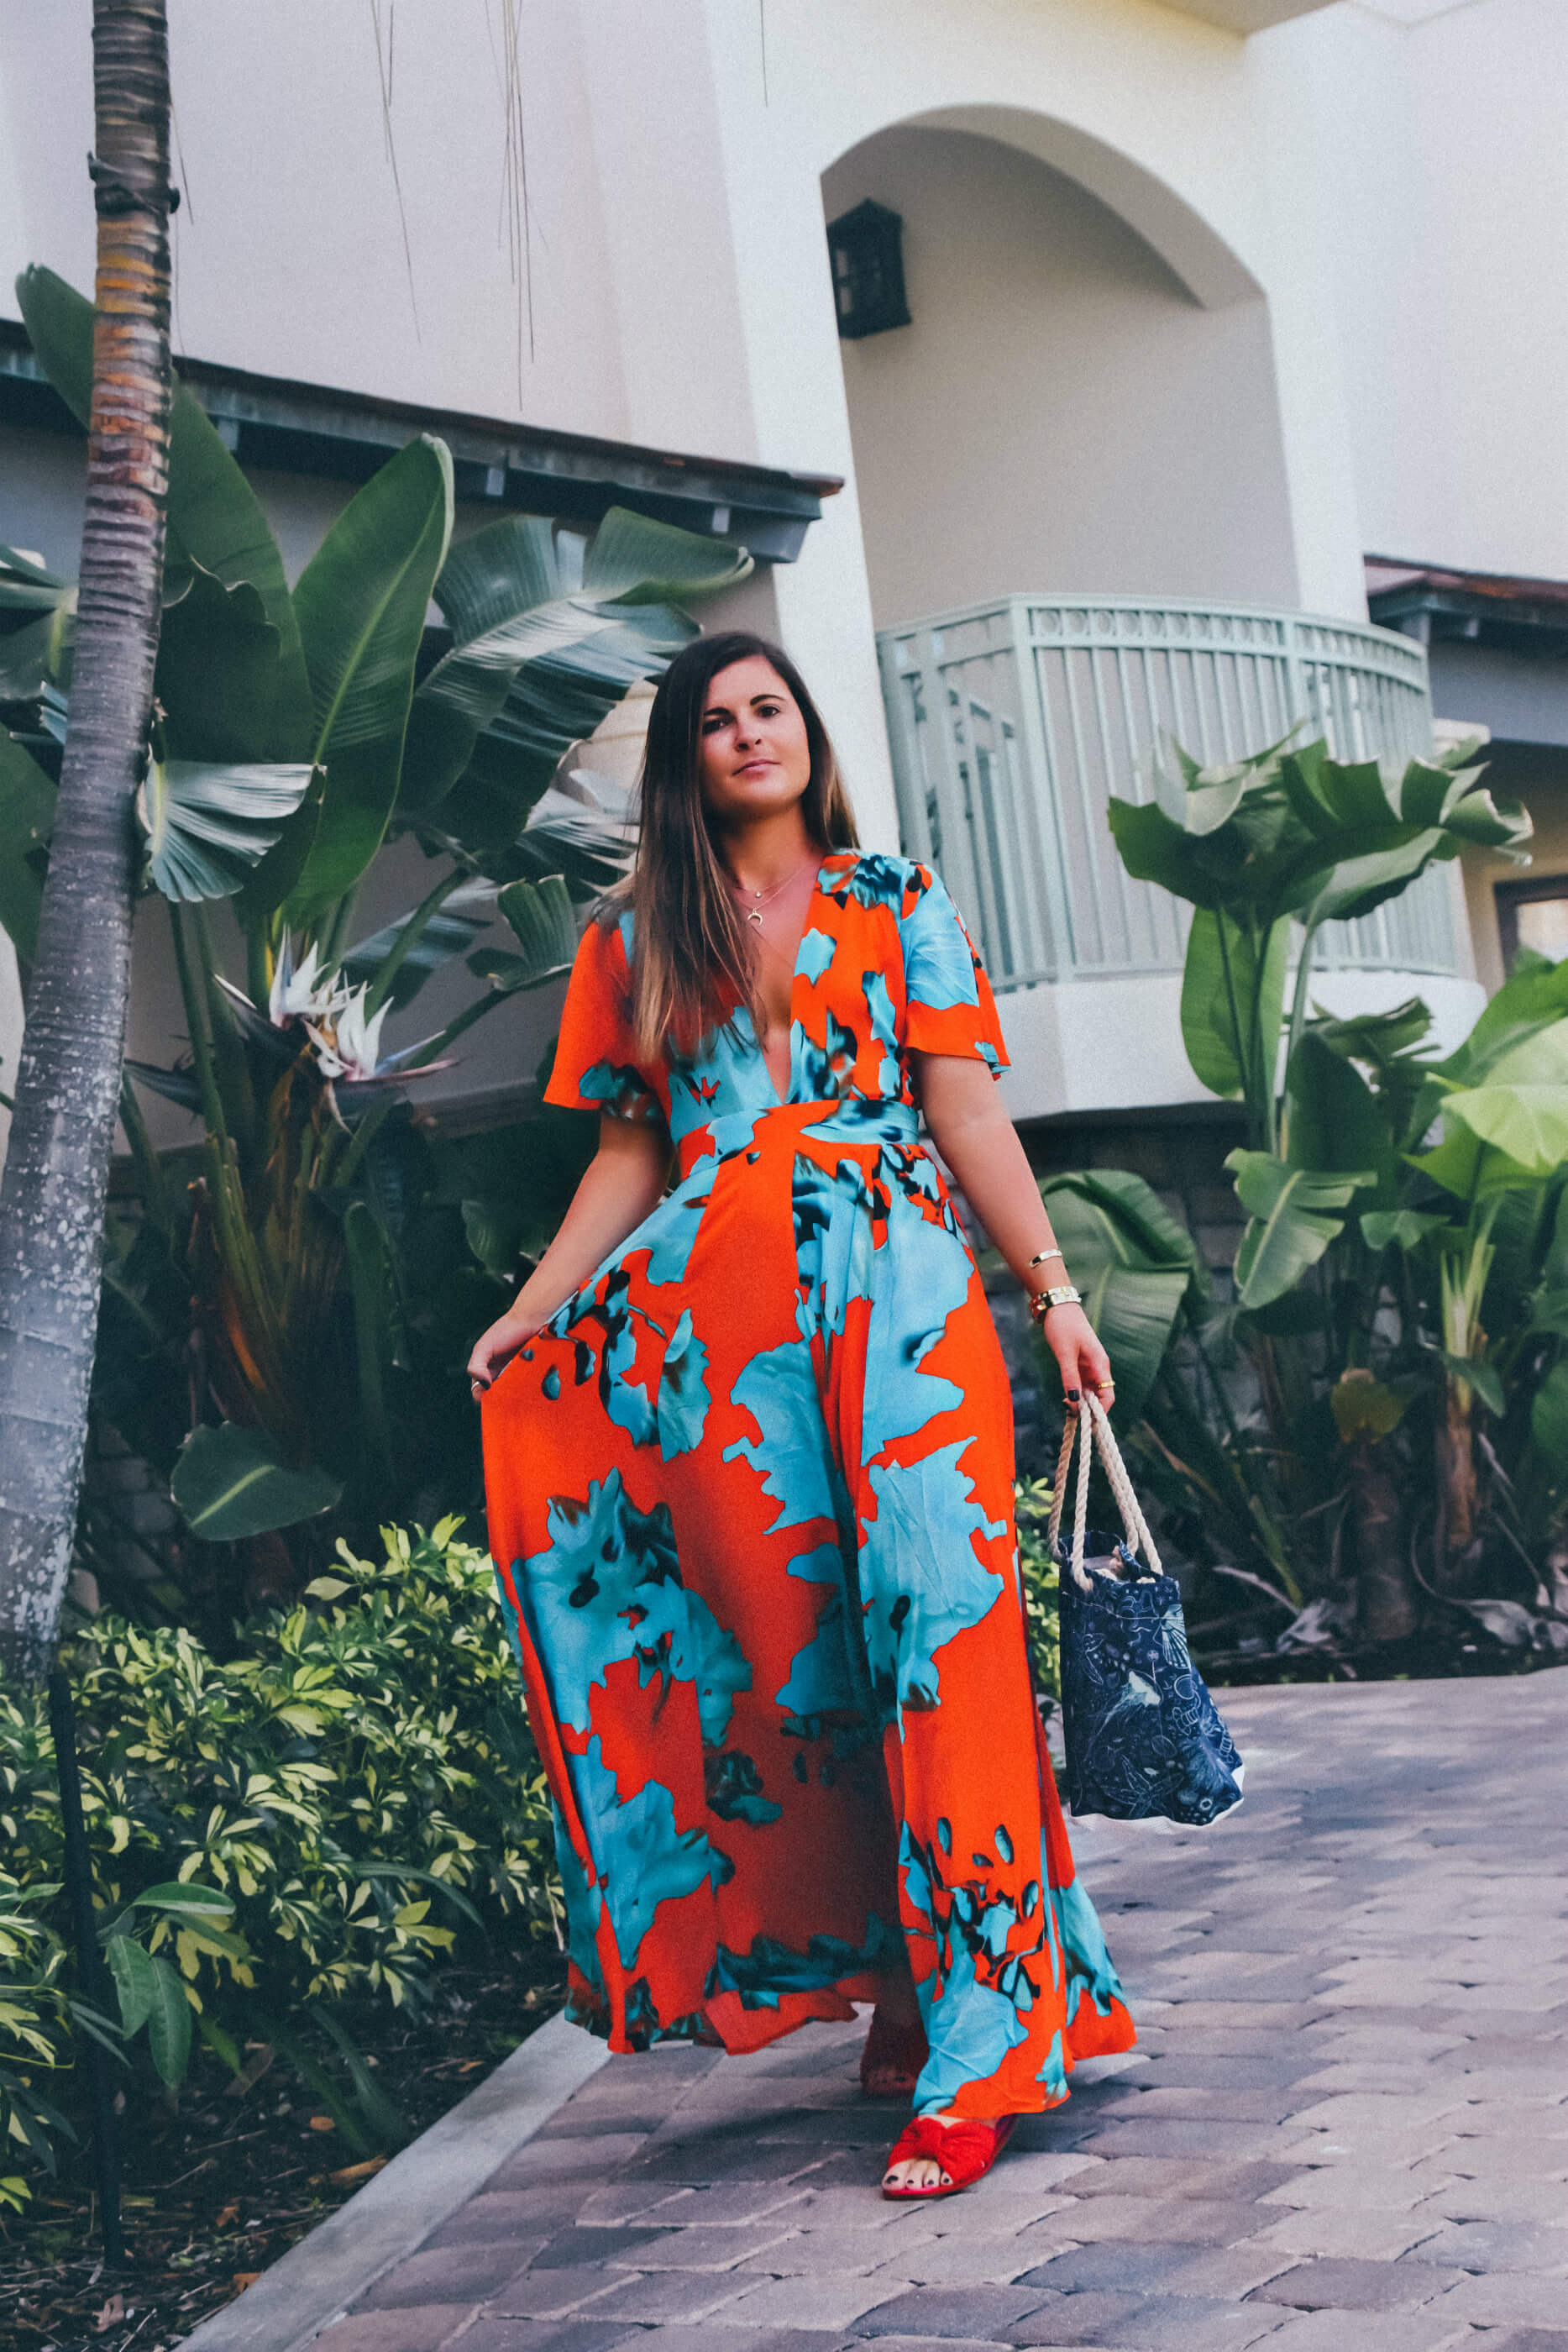 Bahamas Travel Guide, Great Exuma, Sea Bags Bucket Bag, Floral Maxi Dress Outfit, Tropical Outfit, Tilden of To Be Bright